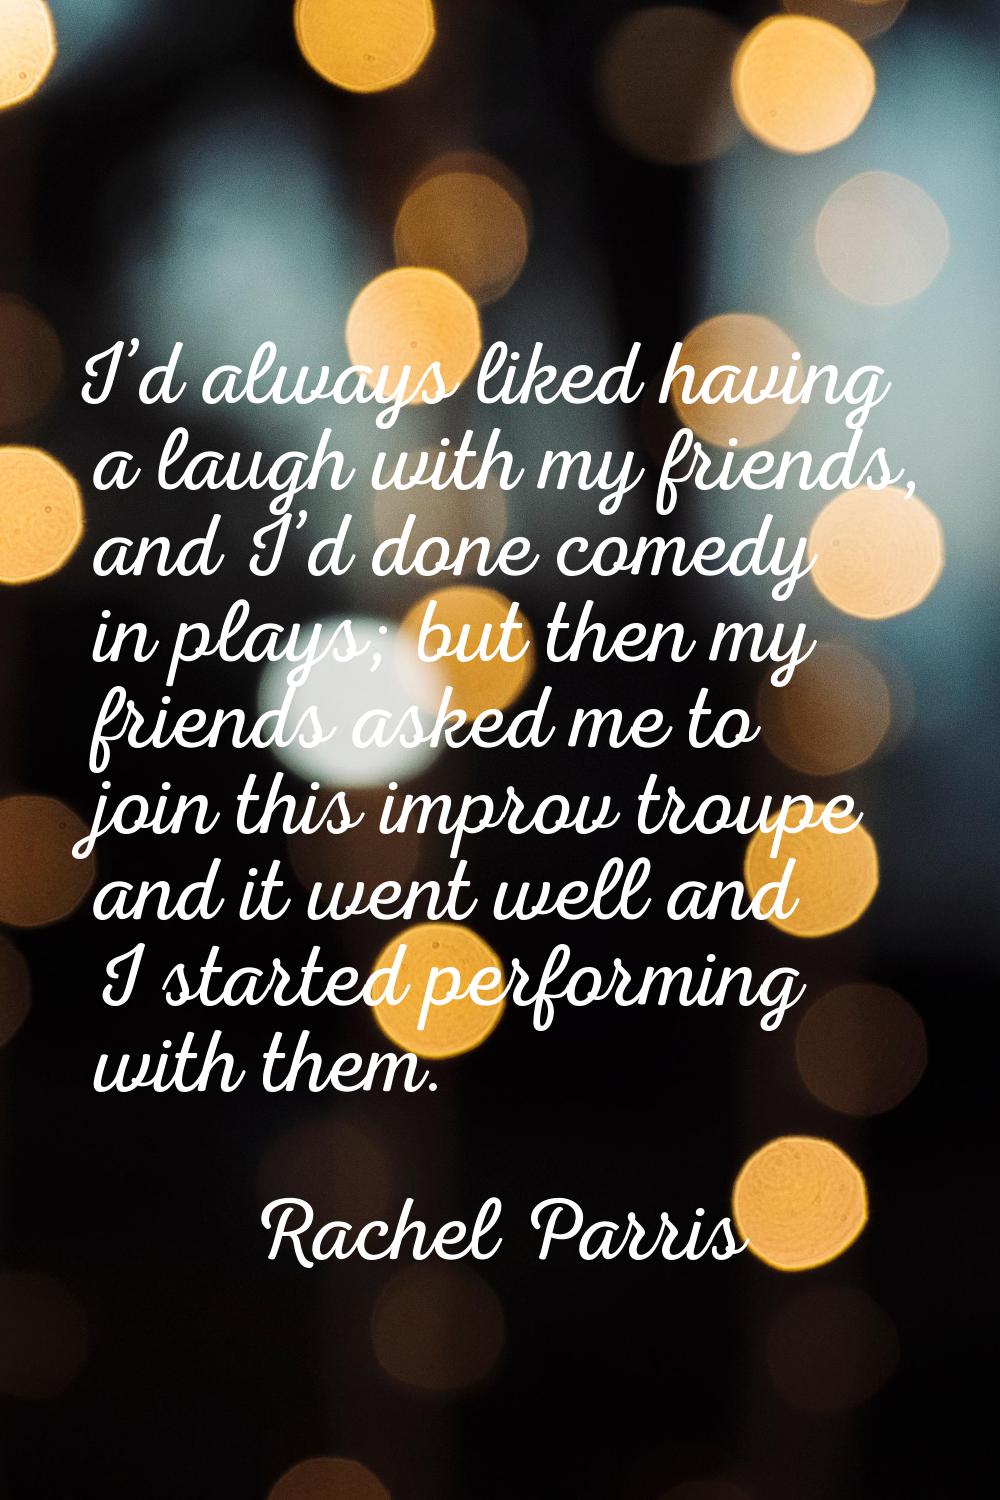 I’d always liked having a laugh with my friends, and I’d done comedy in plays; but then my friends 